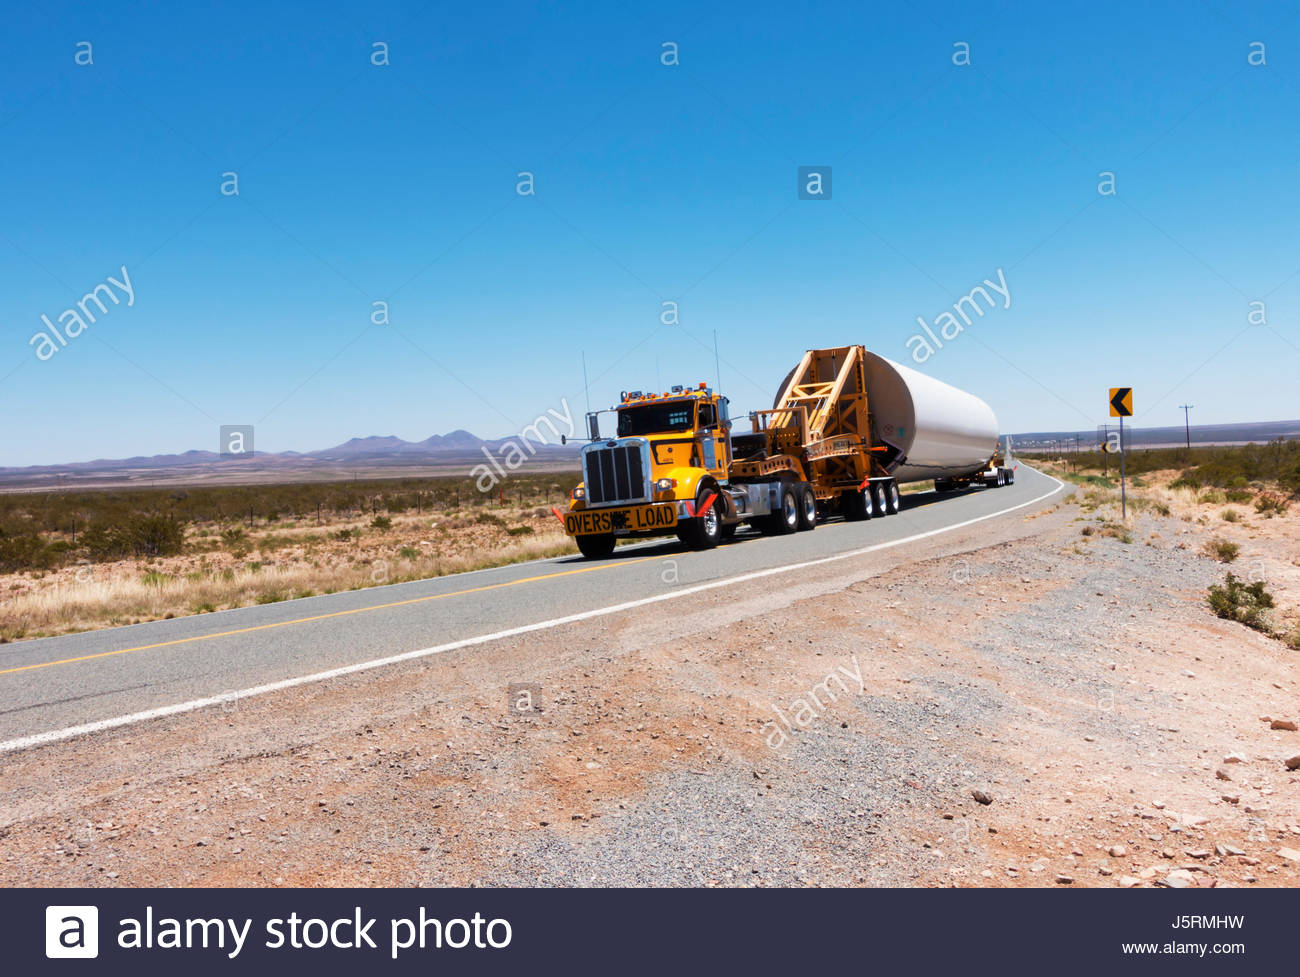 truck-tractor-pulling-oversize-load-prob